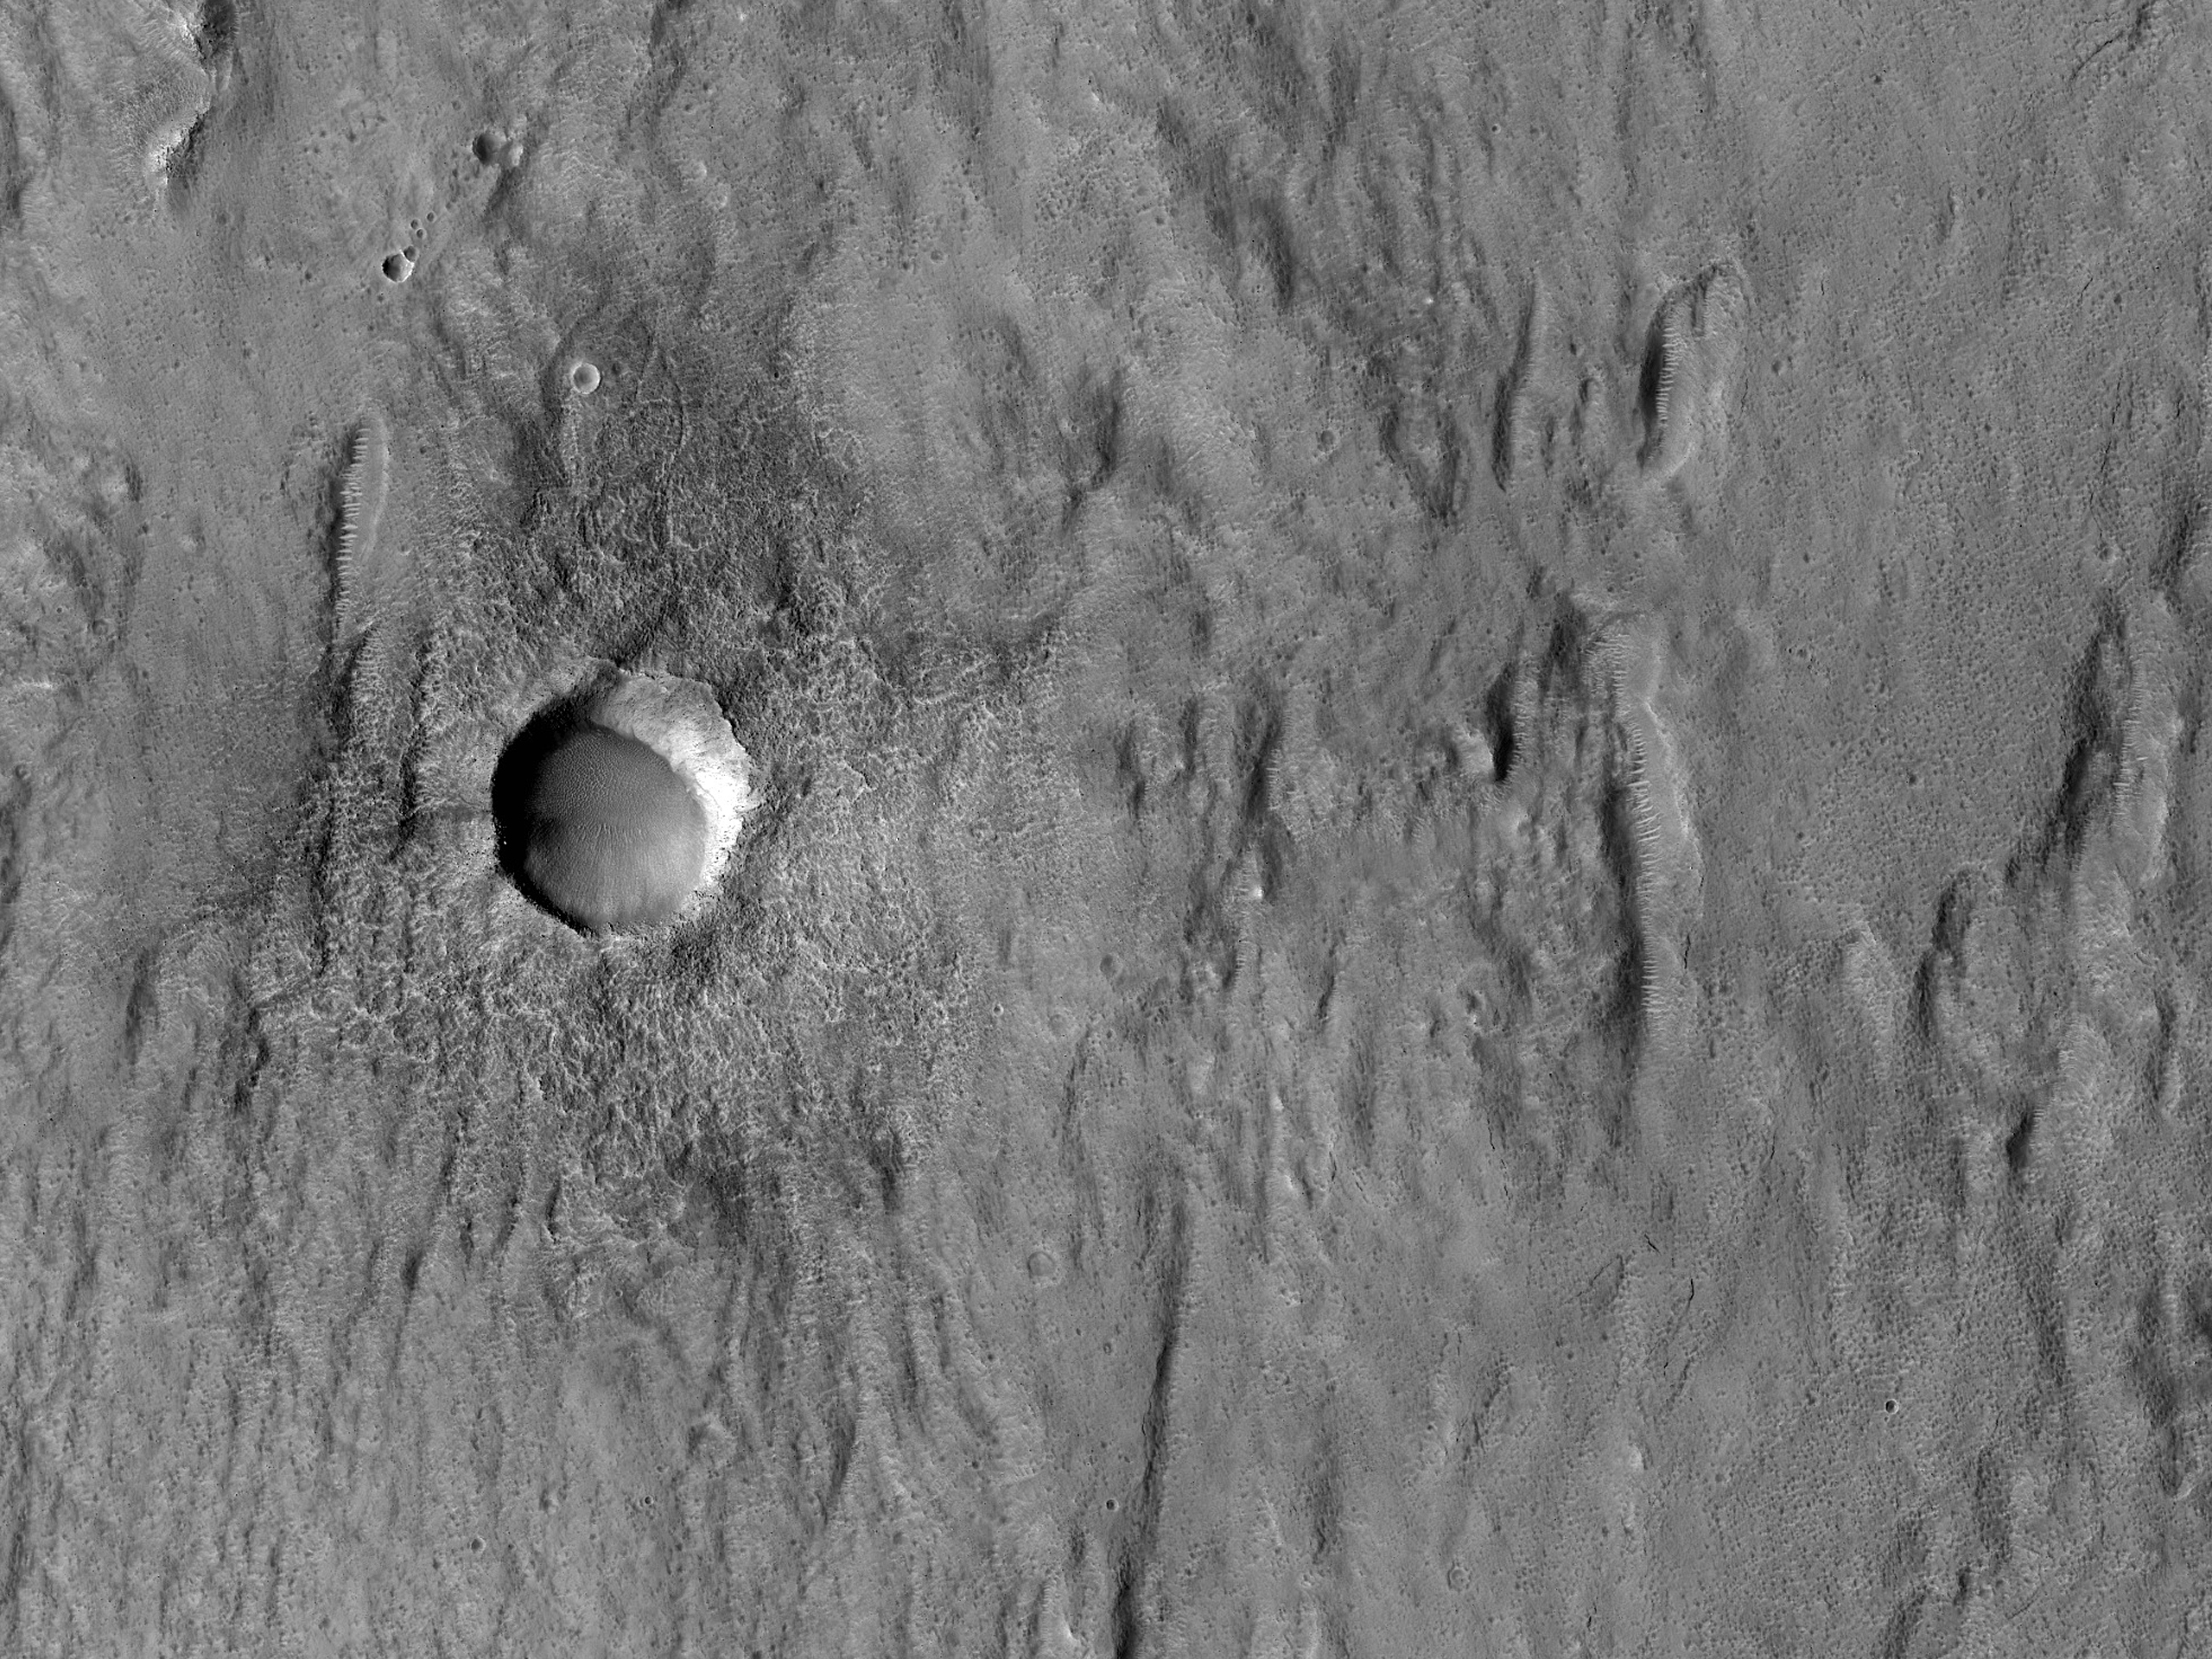 Crater and Pits in the Northern Mid-Latitudes